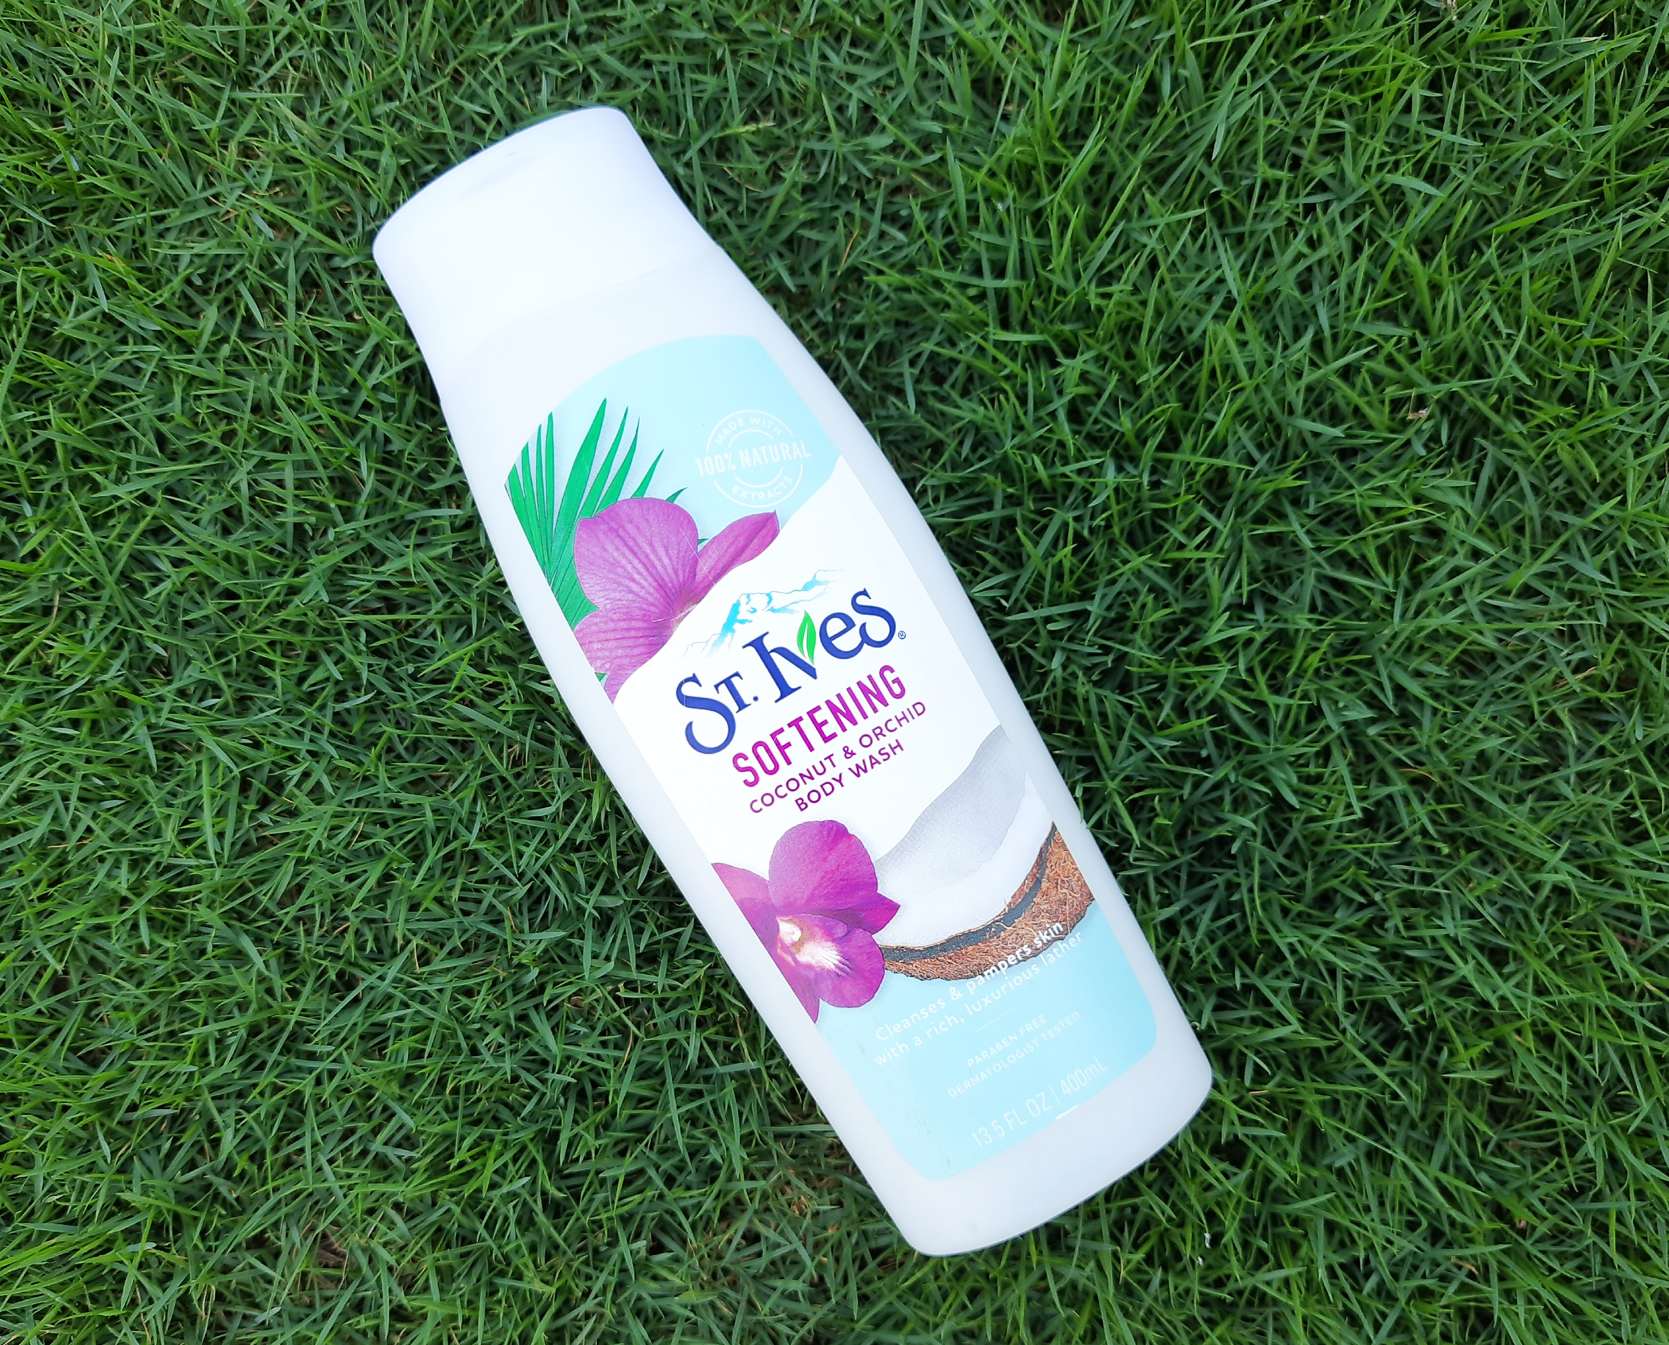 St.ives coconut & Orchid Body Wash Review